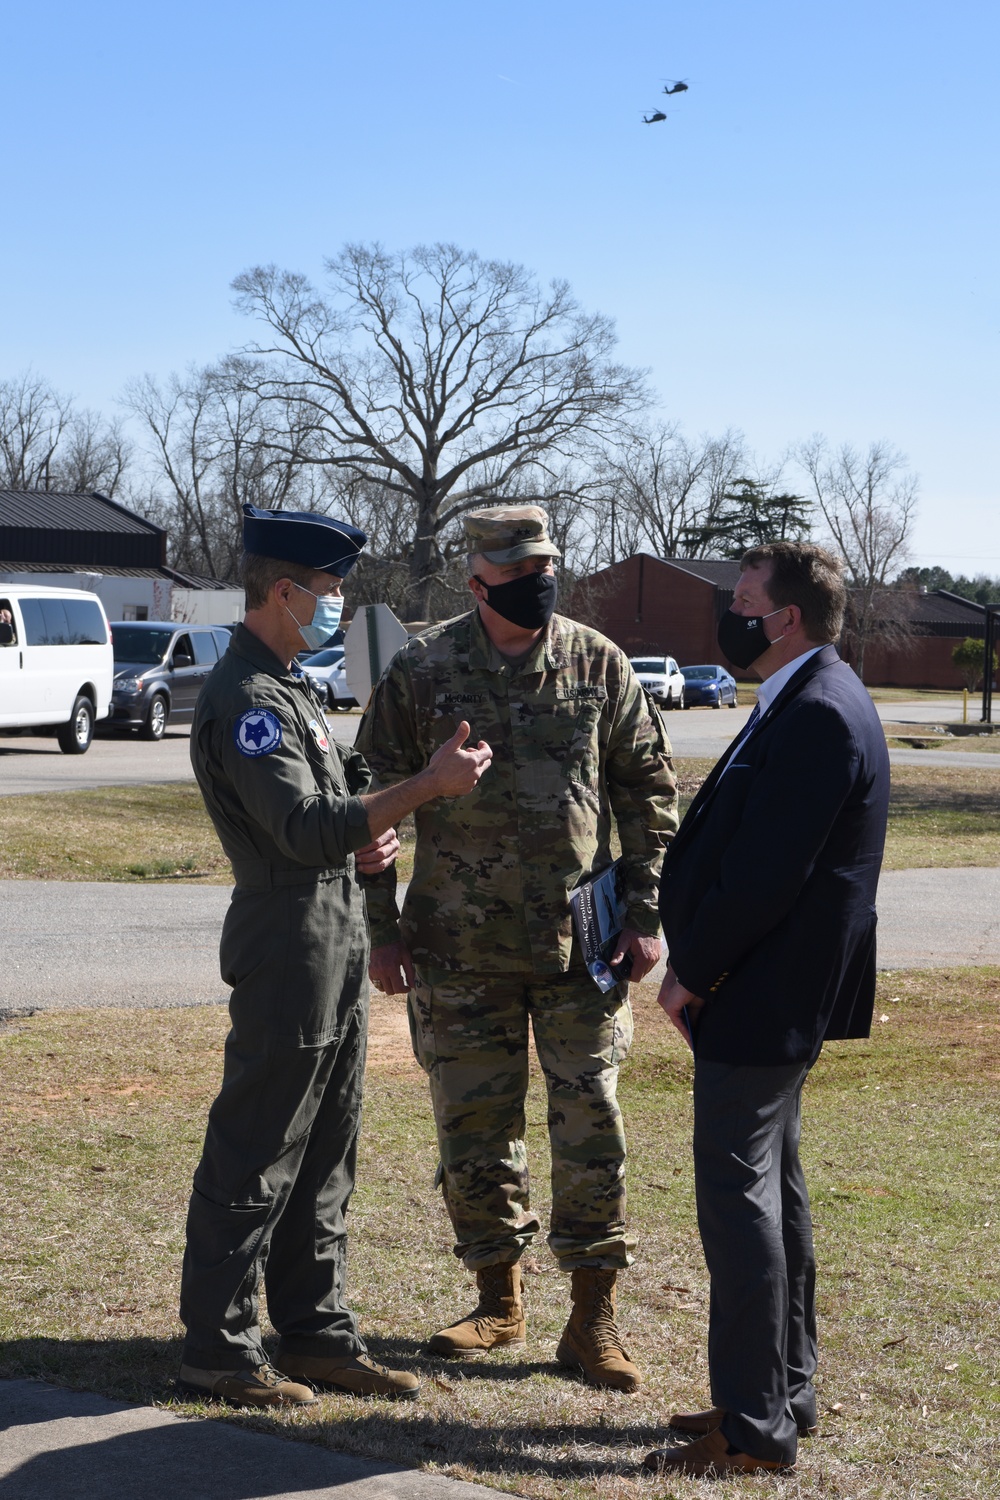 Congressional, state leaders and staff visit McEntire Joint National Guard Base